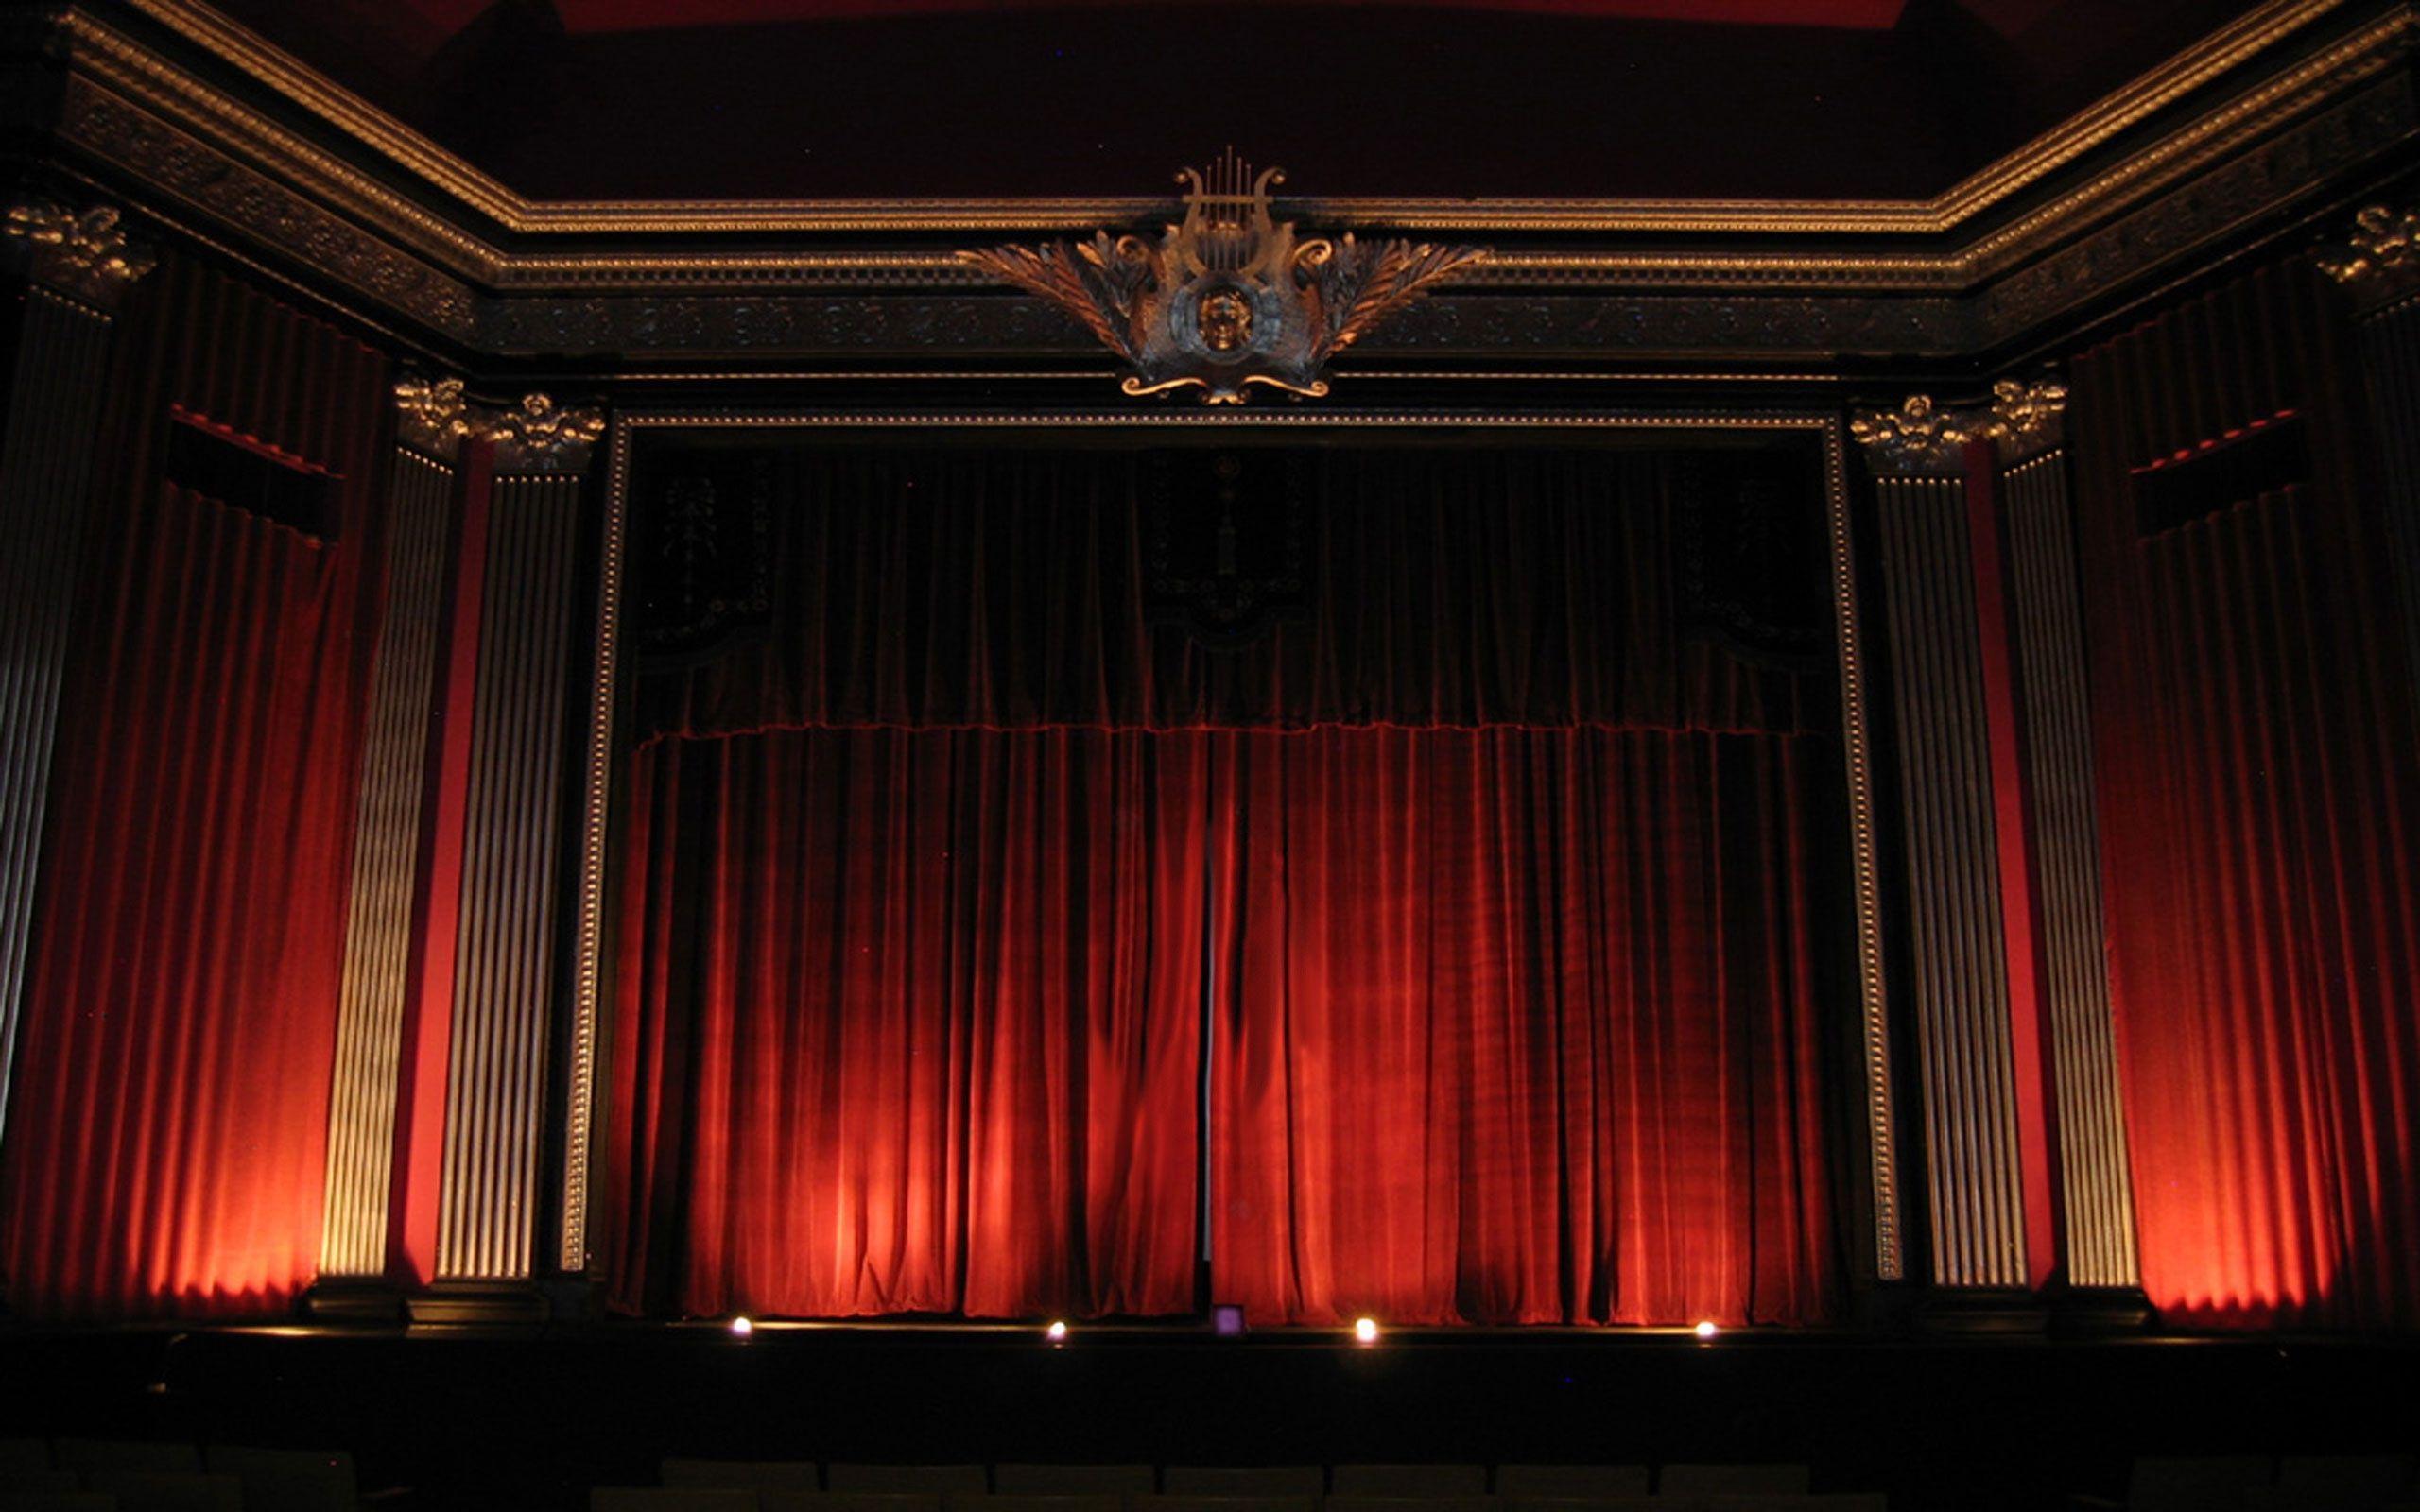 11200 Old Movie Theater Stock Photos Pictures  RoyaltyFree Images   iStock  Old movie theater screen Old movie theater audience